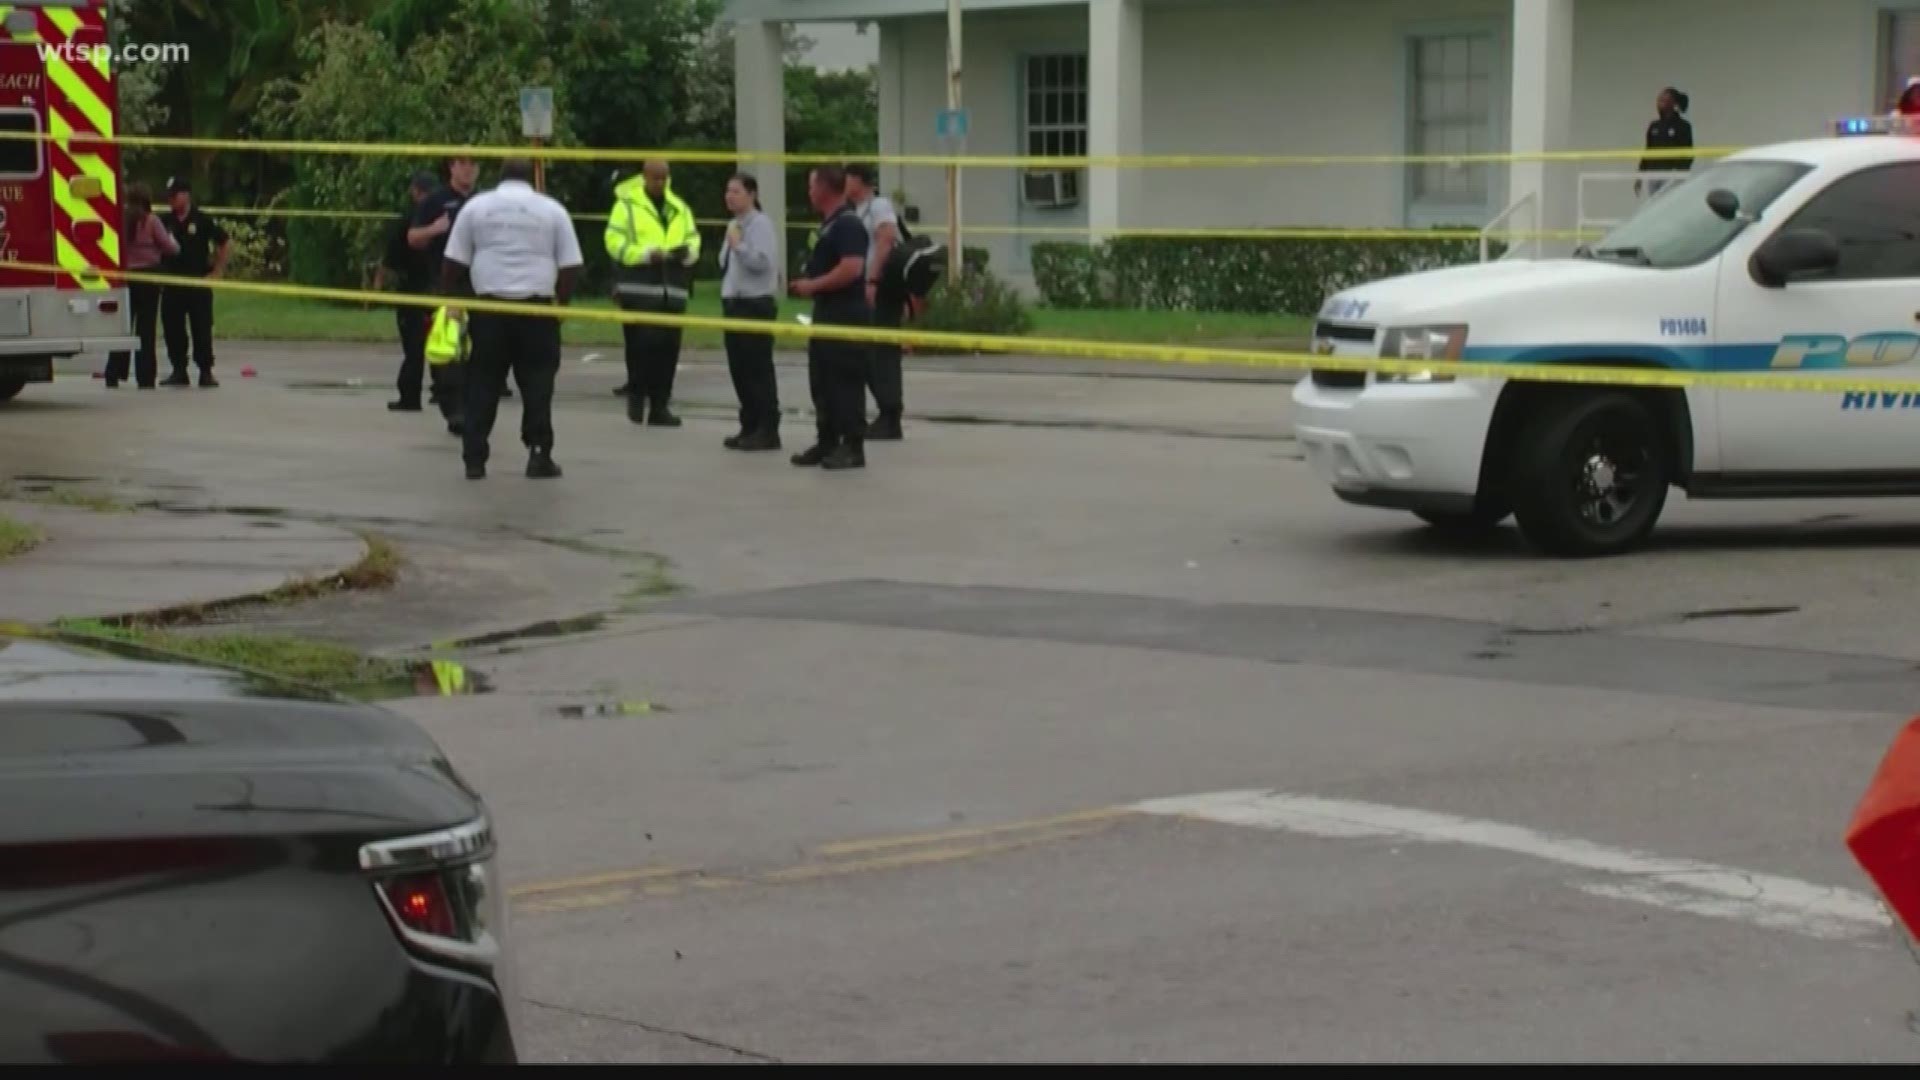 Officers said the shooting happened after a funeral in Riviera Beach.